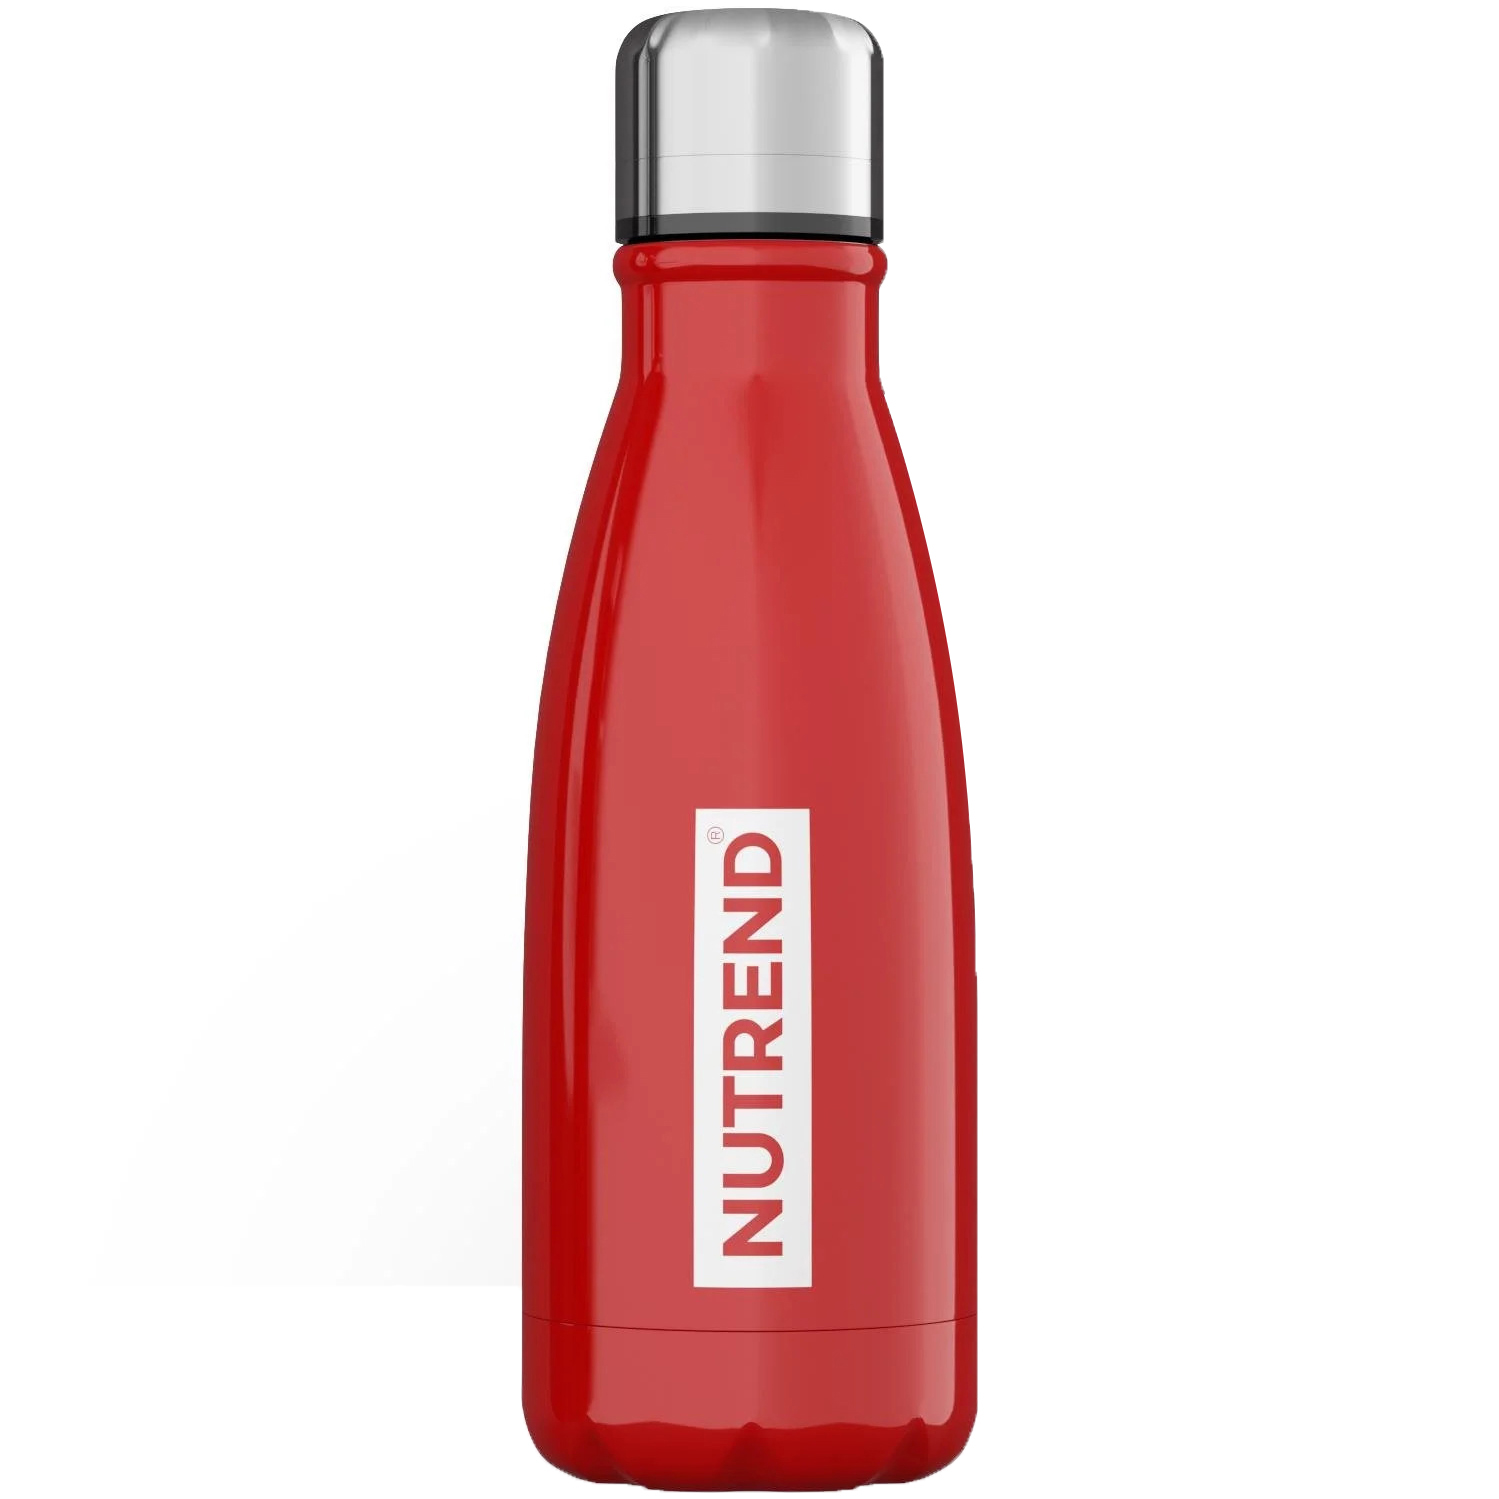 Пляшка Nutrend Stainless Steel Bottle 2021 500 мл red (8594014860566) - фото 1